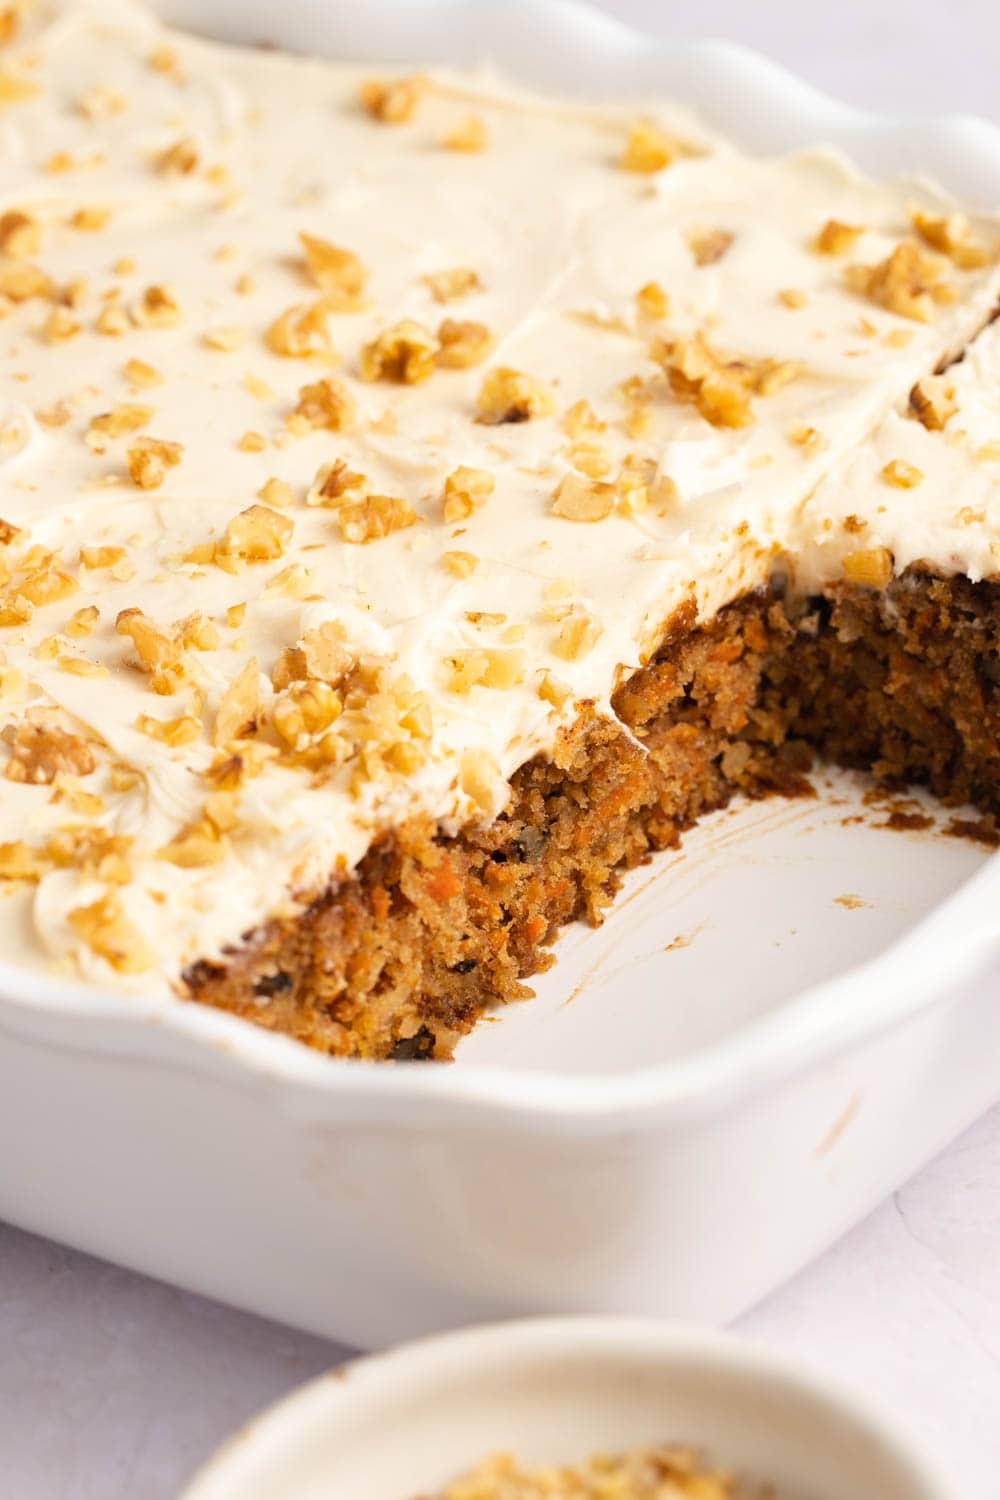 Dense Yet Moist Carrot Cake with Chopped Walnuts